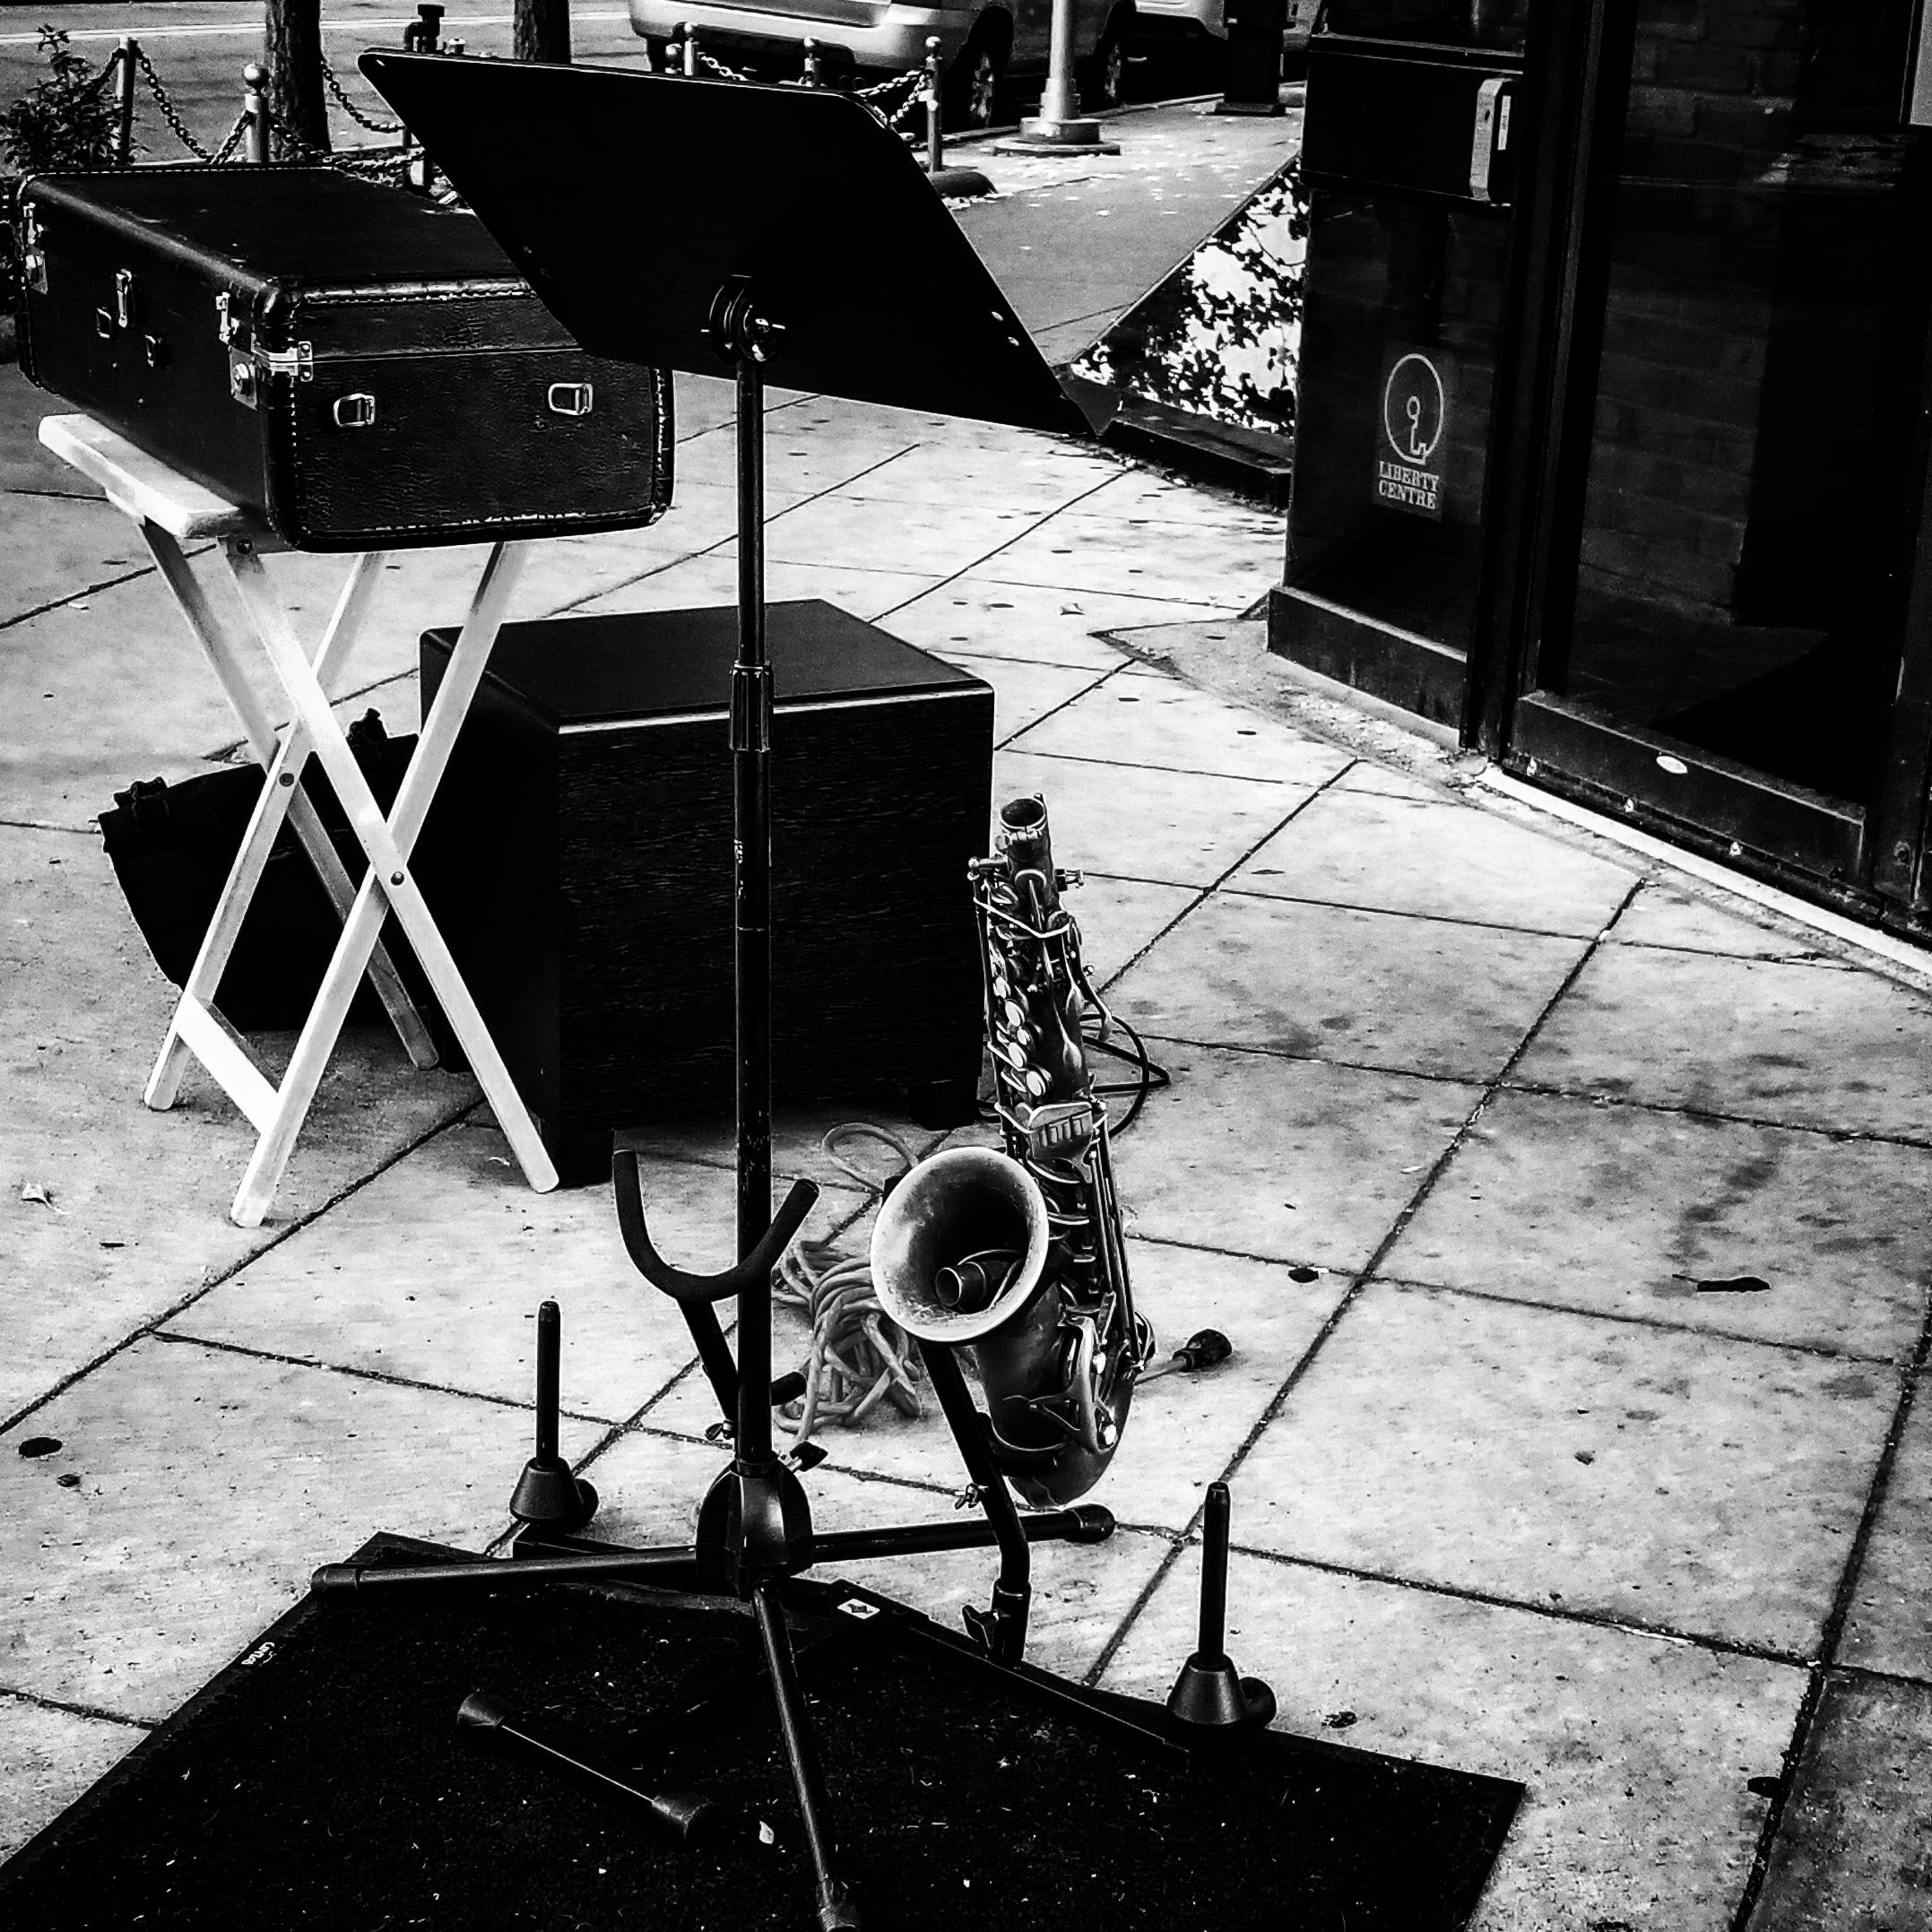 Street Music - Image by Shawn R. Metivier, 2017